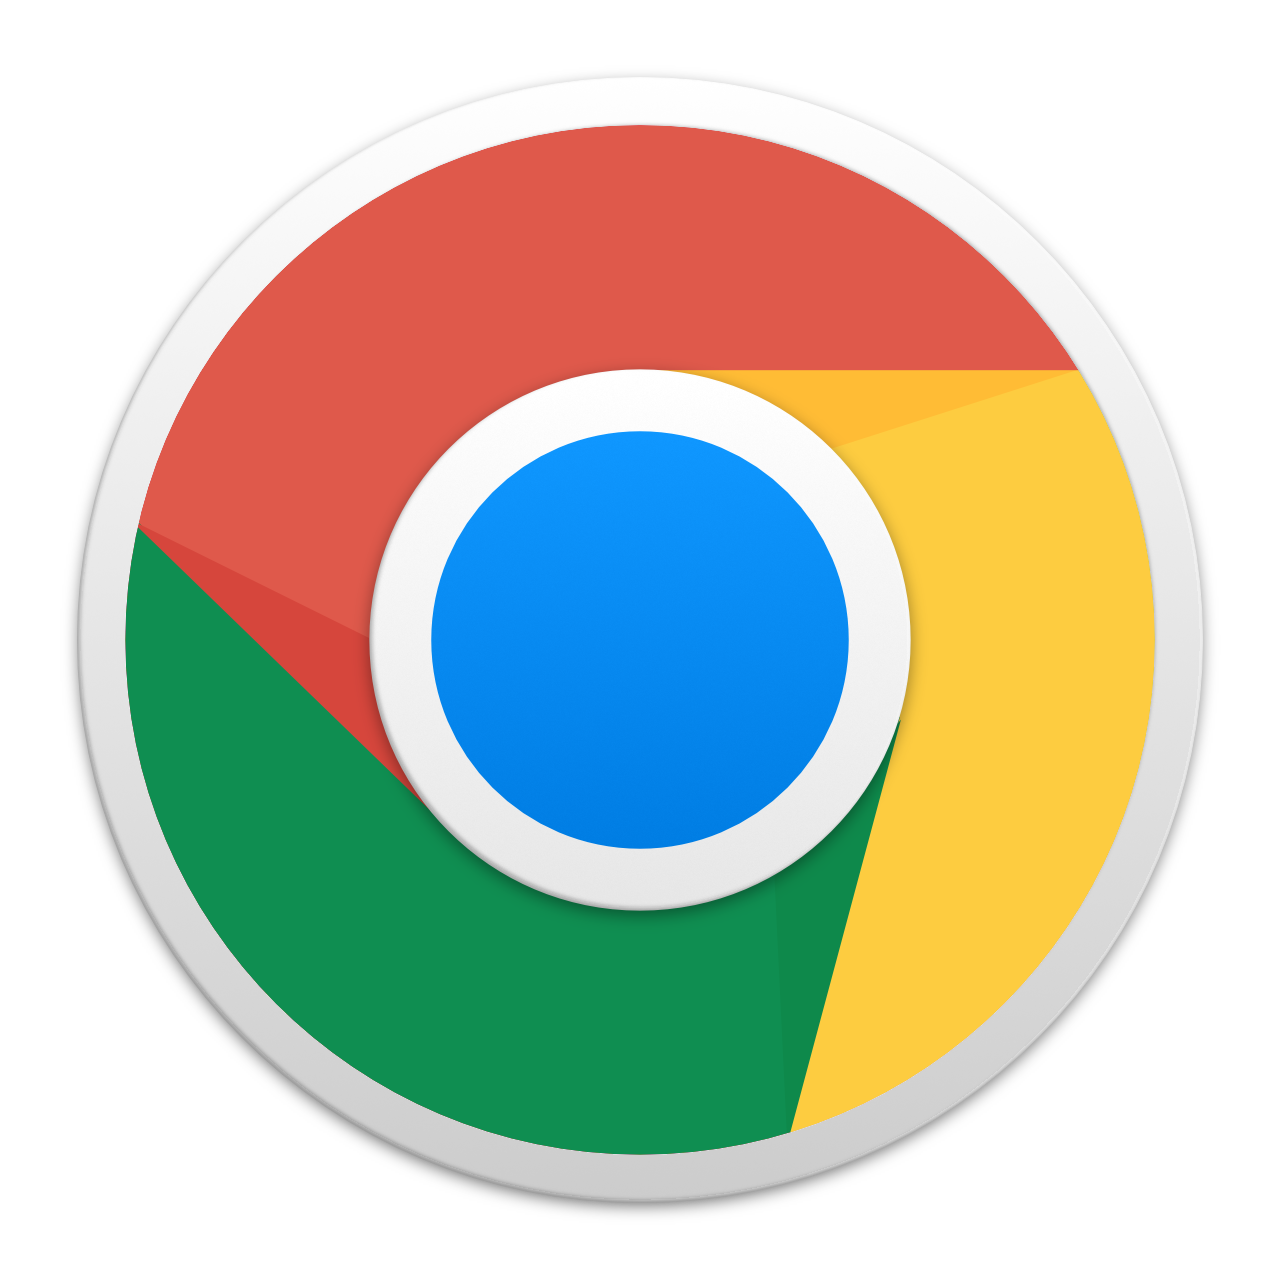 Google Chrome App Icon (Yosemite Style) Updated! by macOScrazy on DeviantArt